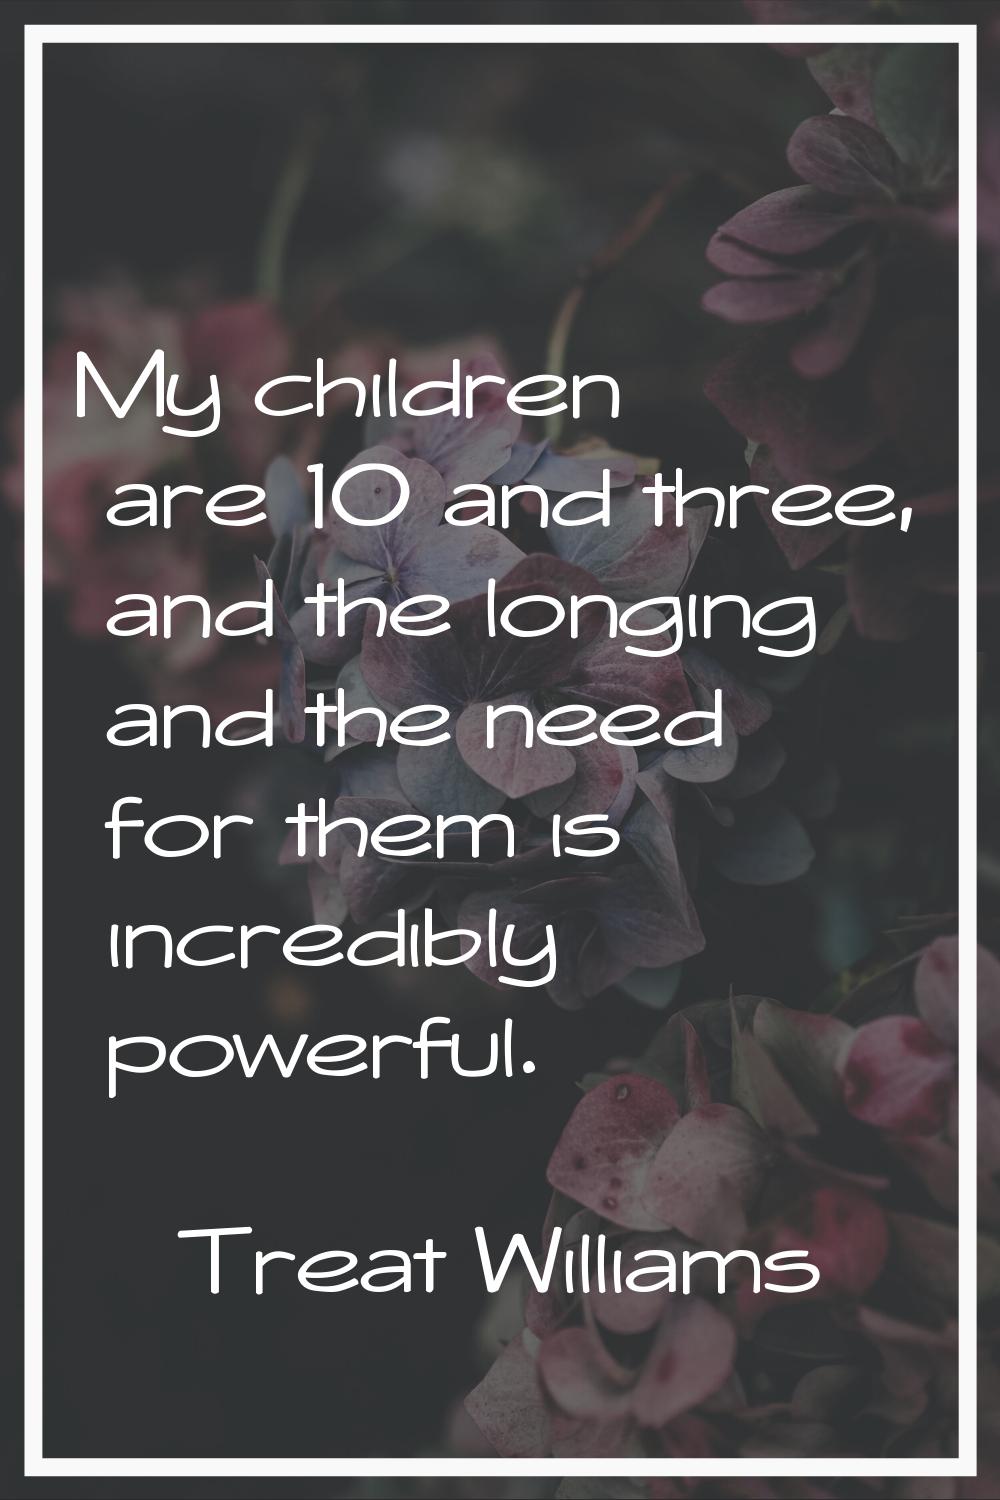 My children are 10 and three, and the longing and the need for them is incredibly powerful.